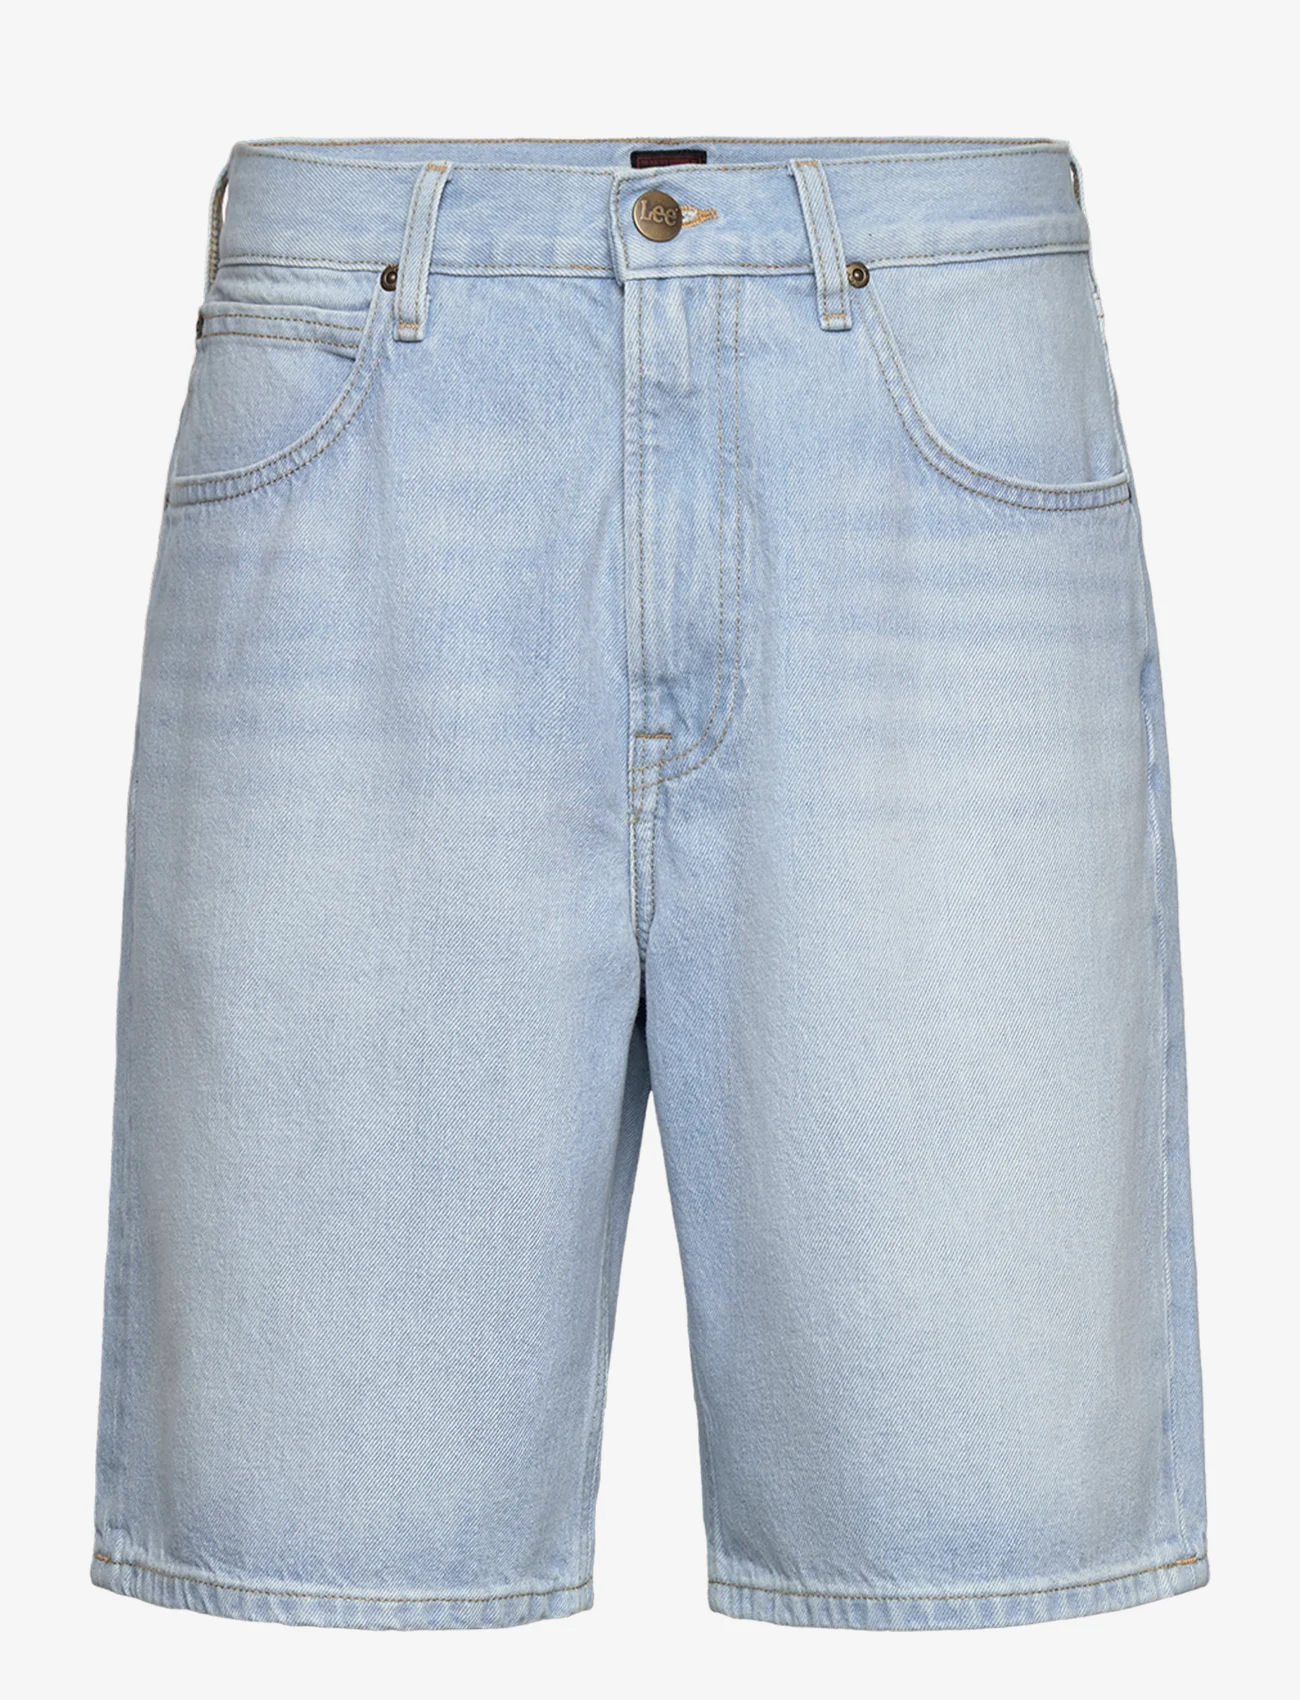 Lee Jeans - ASHER SHORT - jeans shorts - light stone wash - 0